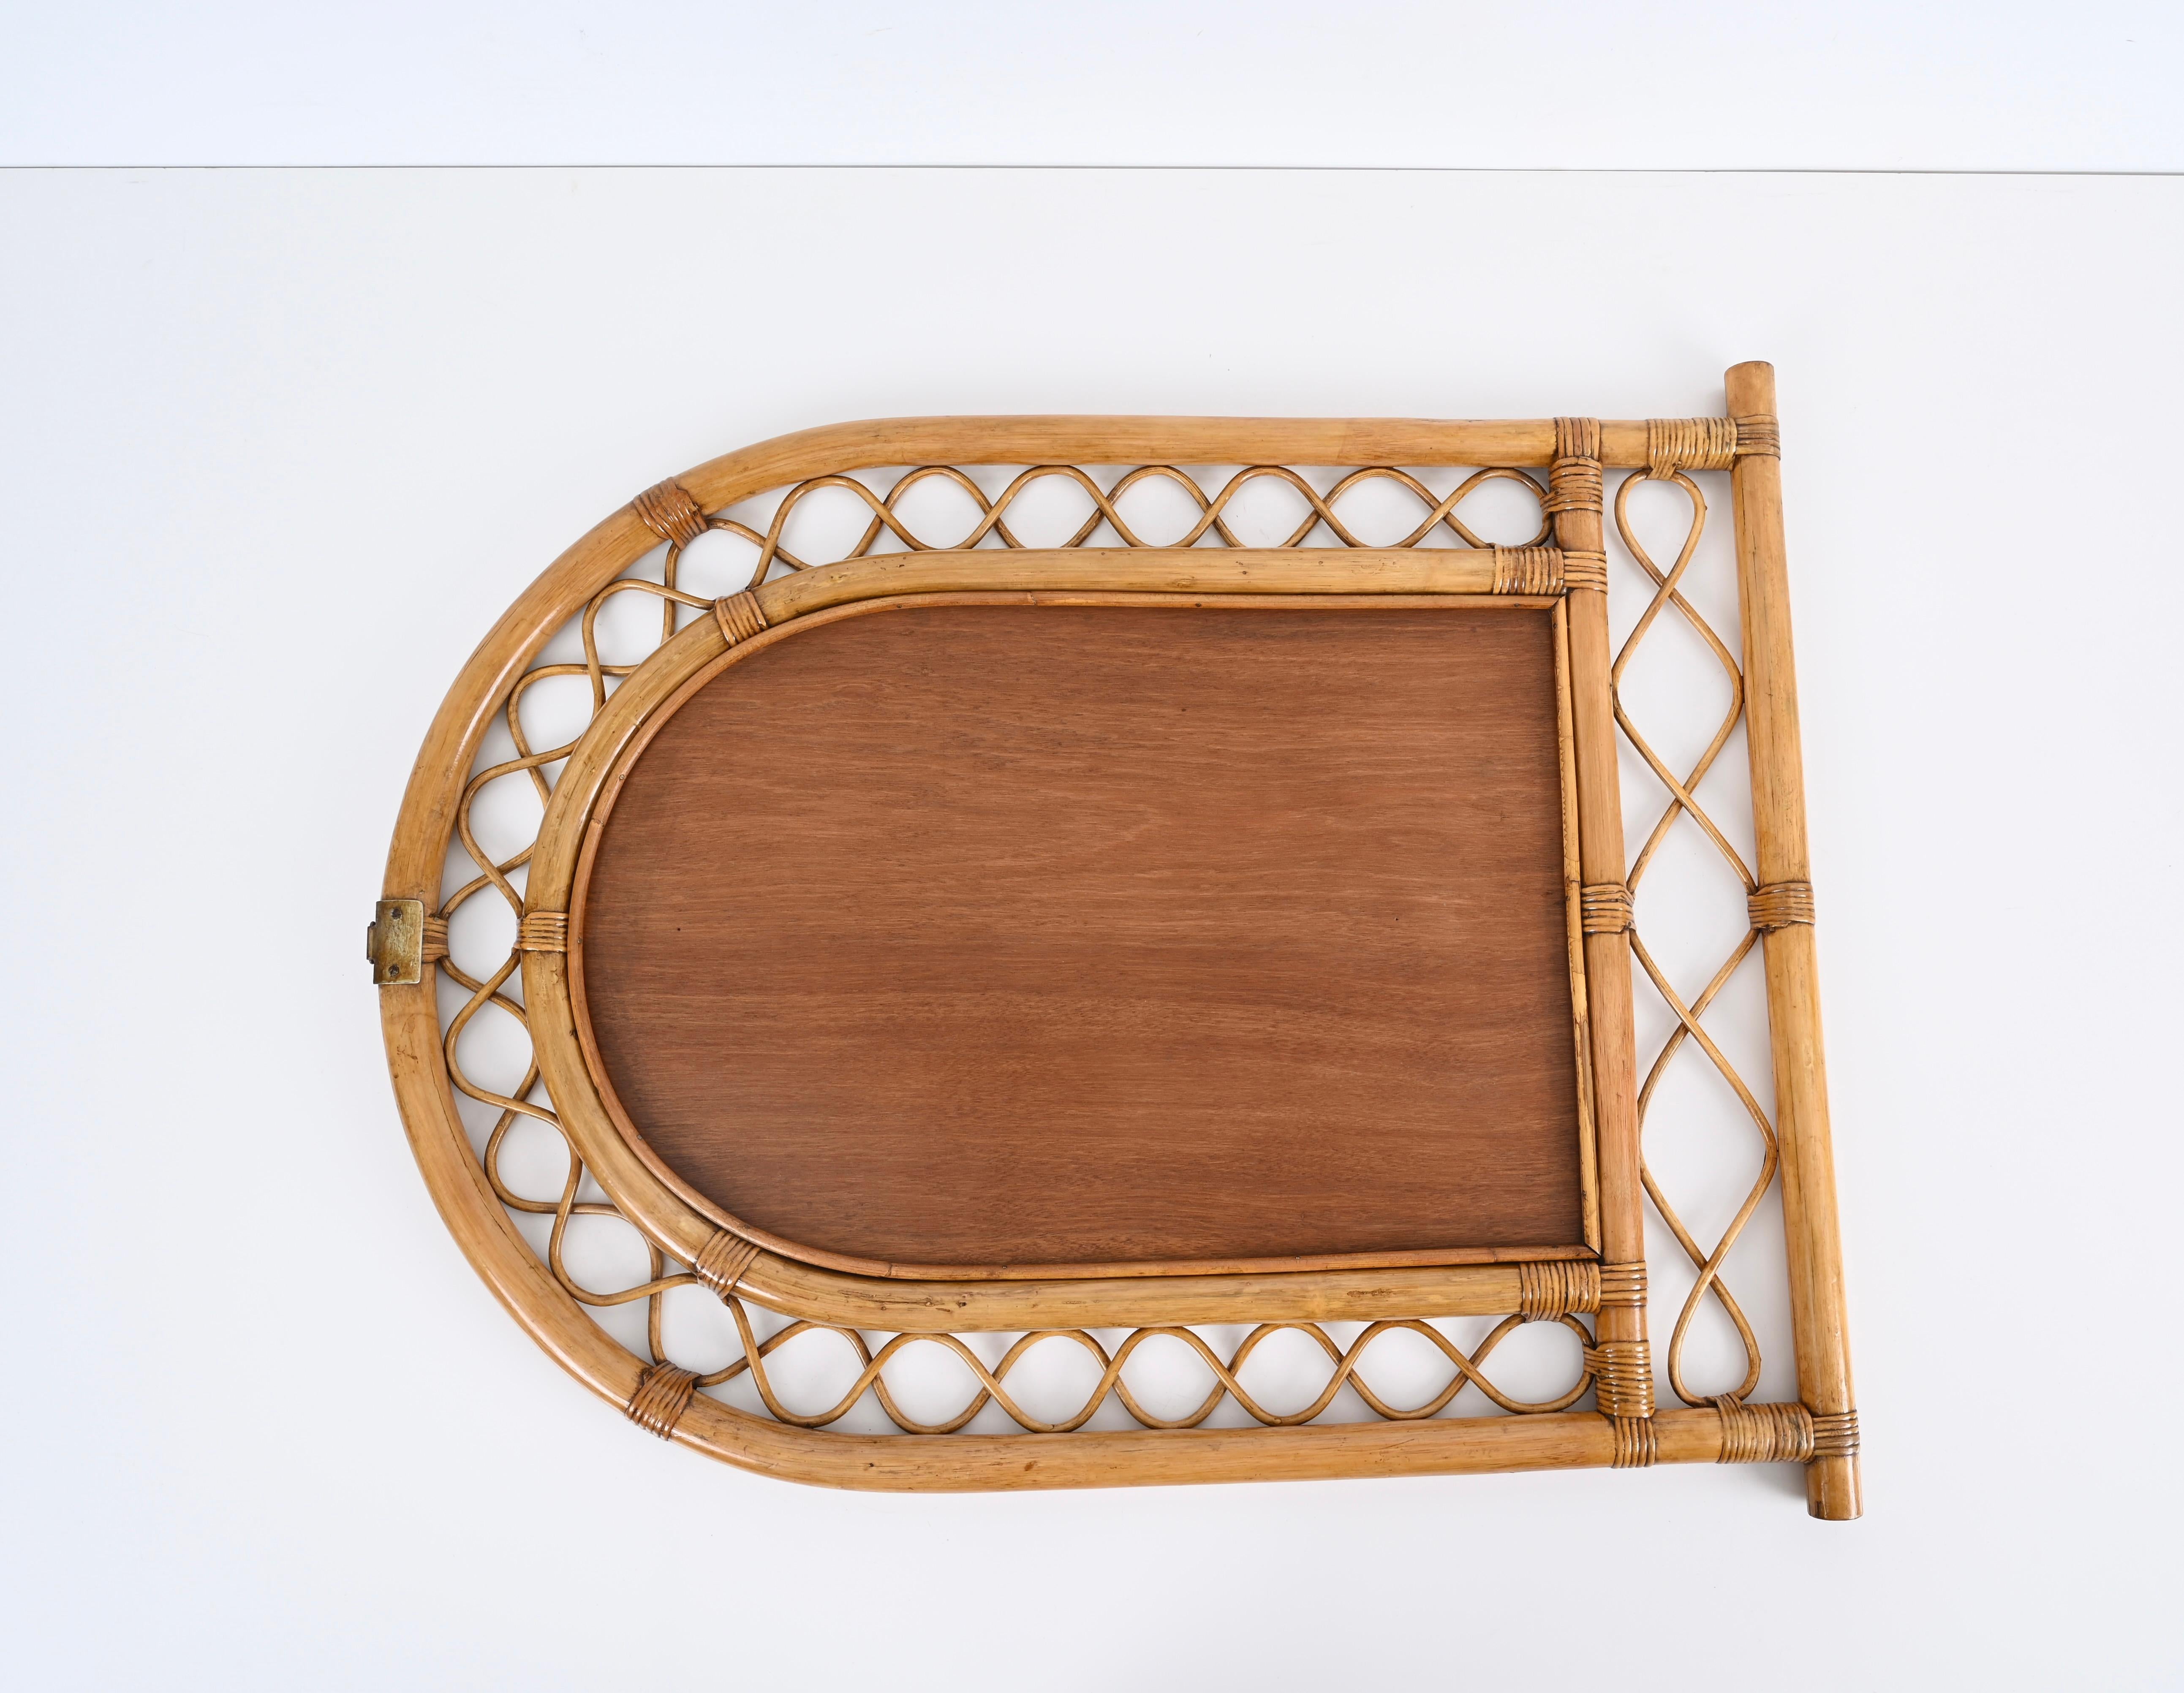 French Riviera Arch Mirror in Rattan, Wicker and Bamboo, Italy 1960s For Sale 5